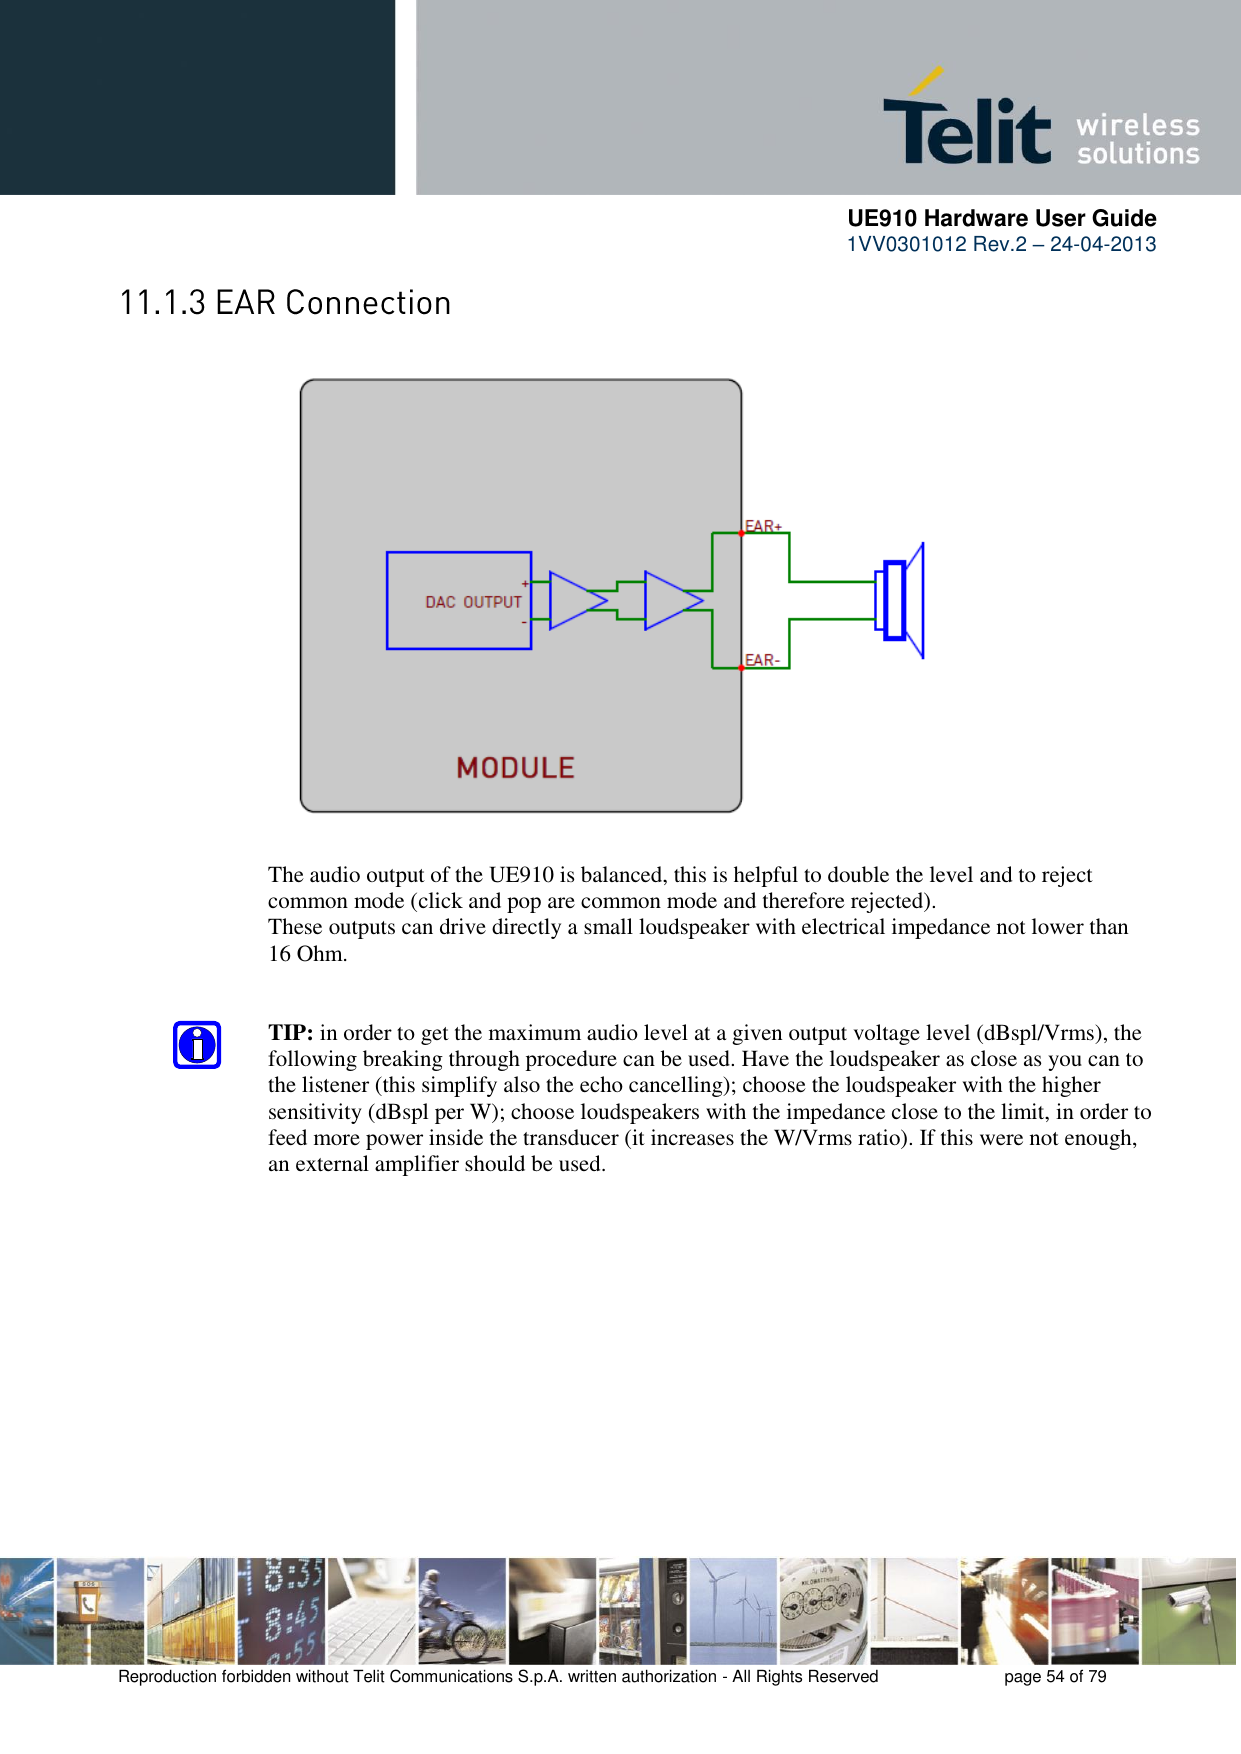      UE910 Hardware User Guide  1VV0301012 Rev.2 – 24-04-2013    Reproduction forbidden without Telit Communications S.p.A. written authorization - All Rights Reserved    page 54 of 79                       The audio output of the UE910 is balanced, this is helpful to double the level and to reject common mode (click and pop are common mode and therefore rejected). These outputs can drive directly a small loudspeaker with electrical impedance not lower than 16 Ohm.   TIP: in order to get the maximum audio level at a given output voltage level (dBspl/Vrms), the following breaking through procedure can be used. Have the loudspeaker as close as you can to the listener (this simplify also the echo cancelling); choose the loudspeaker with the higher sensitivity (dBspl per W); choose loudspeakers with the impedance close to the limit, in order to feed more power inside the transducer (it increases the W/Vrms ratio). If this were not enough, an external amplifier should be used.              